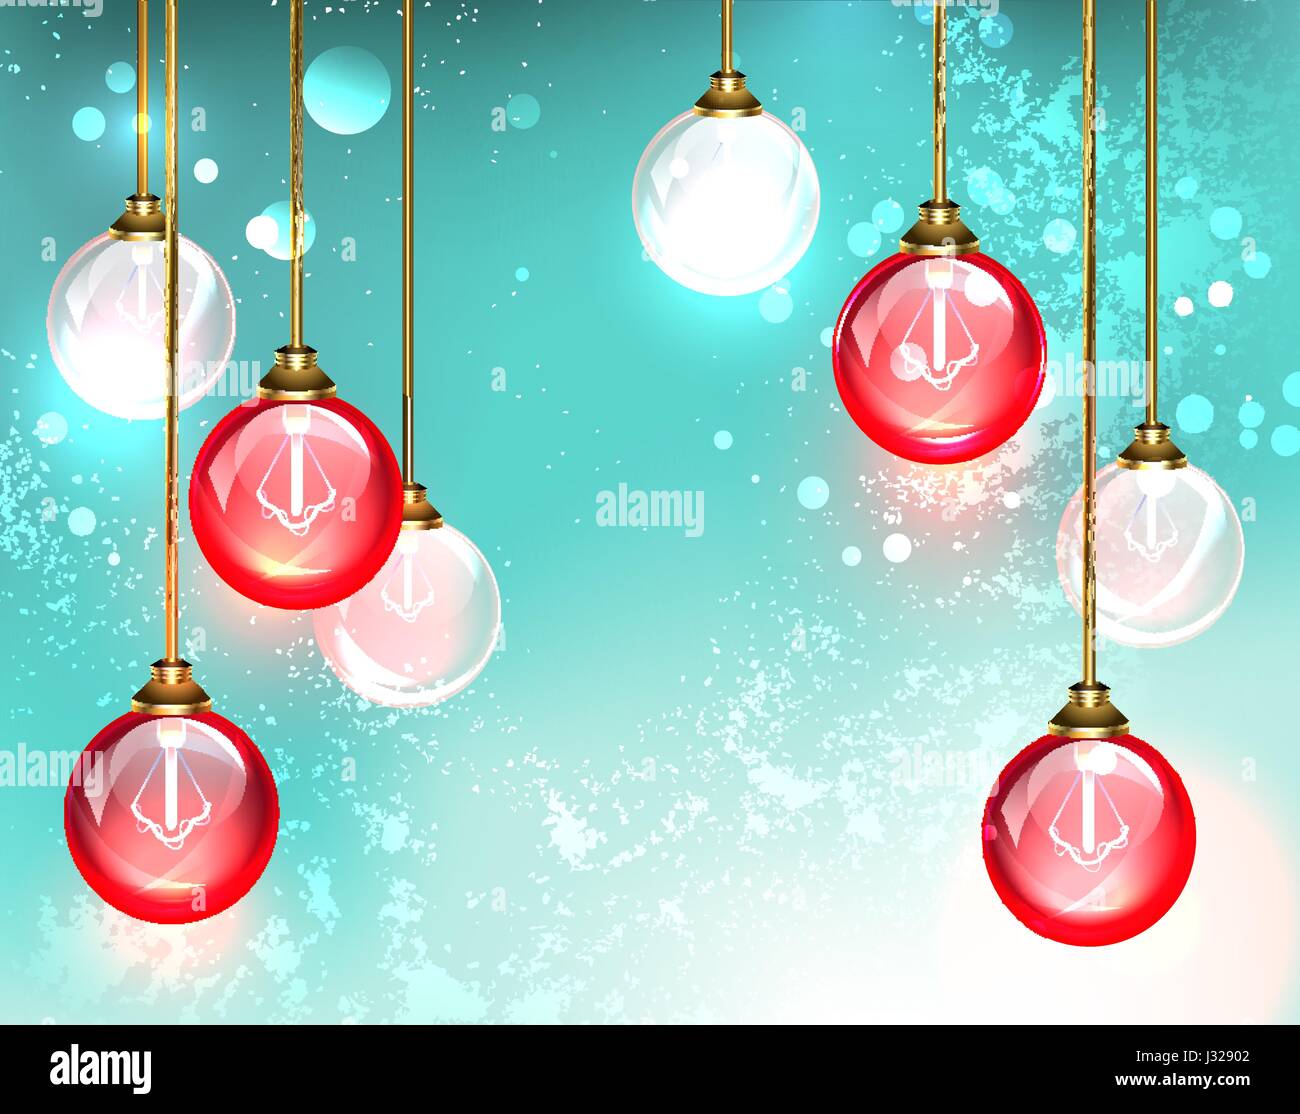 Fashion chandelier with hanging red round glass light bulb glow on the turquoise background. Design with bulbs. Stock Vector